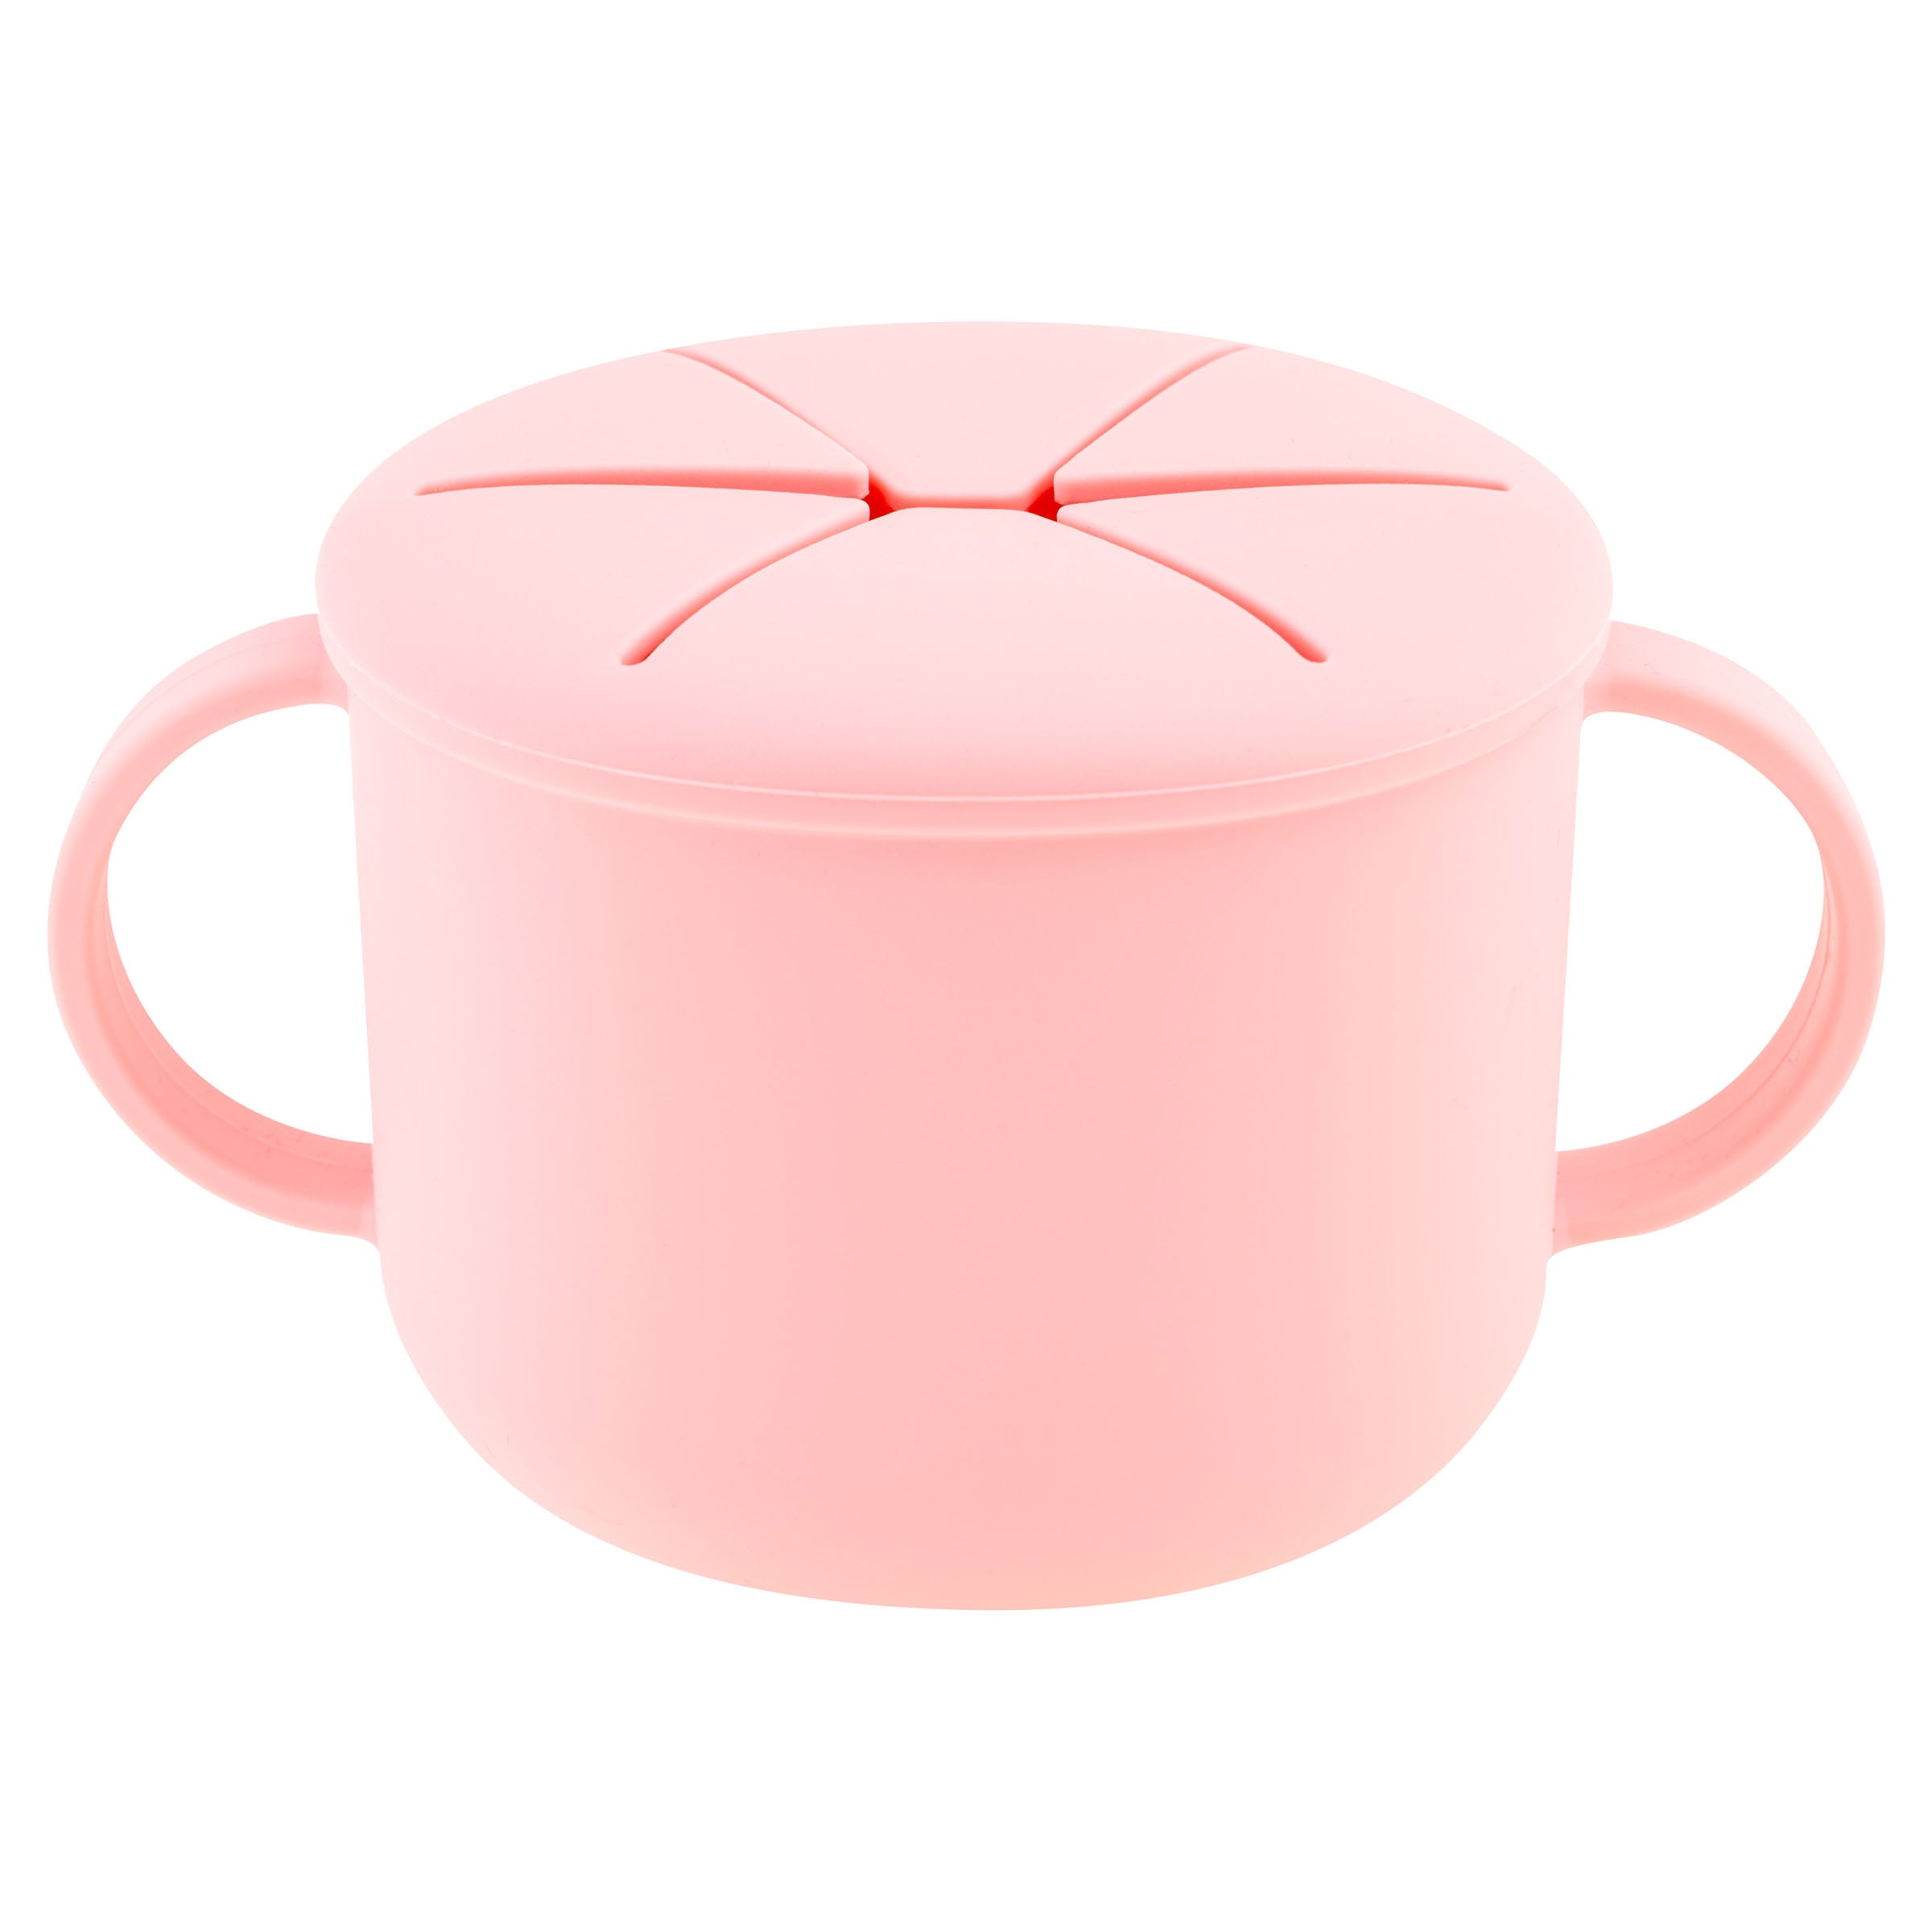 Jollytot, Silicone Snack Cup